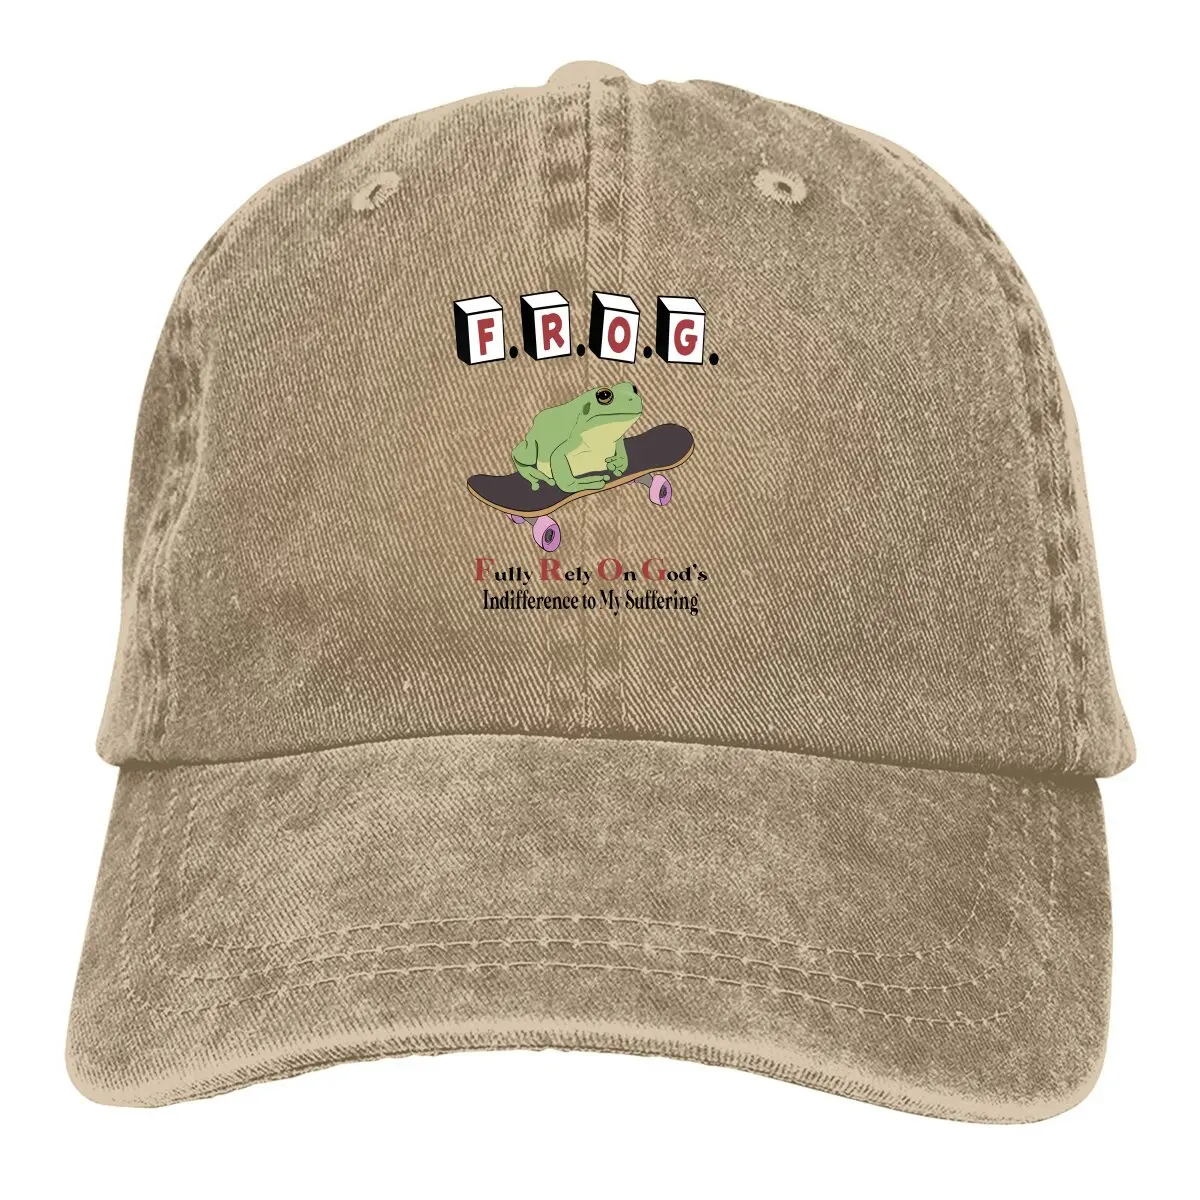 

Washed Men's Baseball Cap Fully Rely On God's Indifference Trucker Snapback Caps Dad Hat Funny Frog Animal Golf Hats